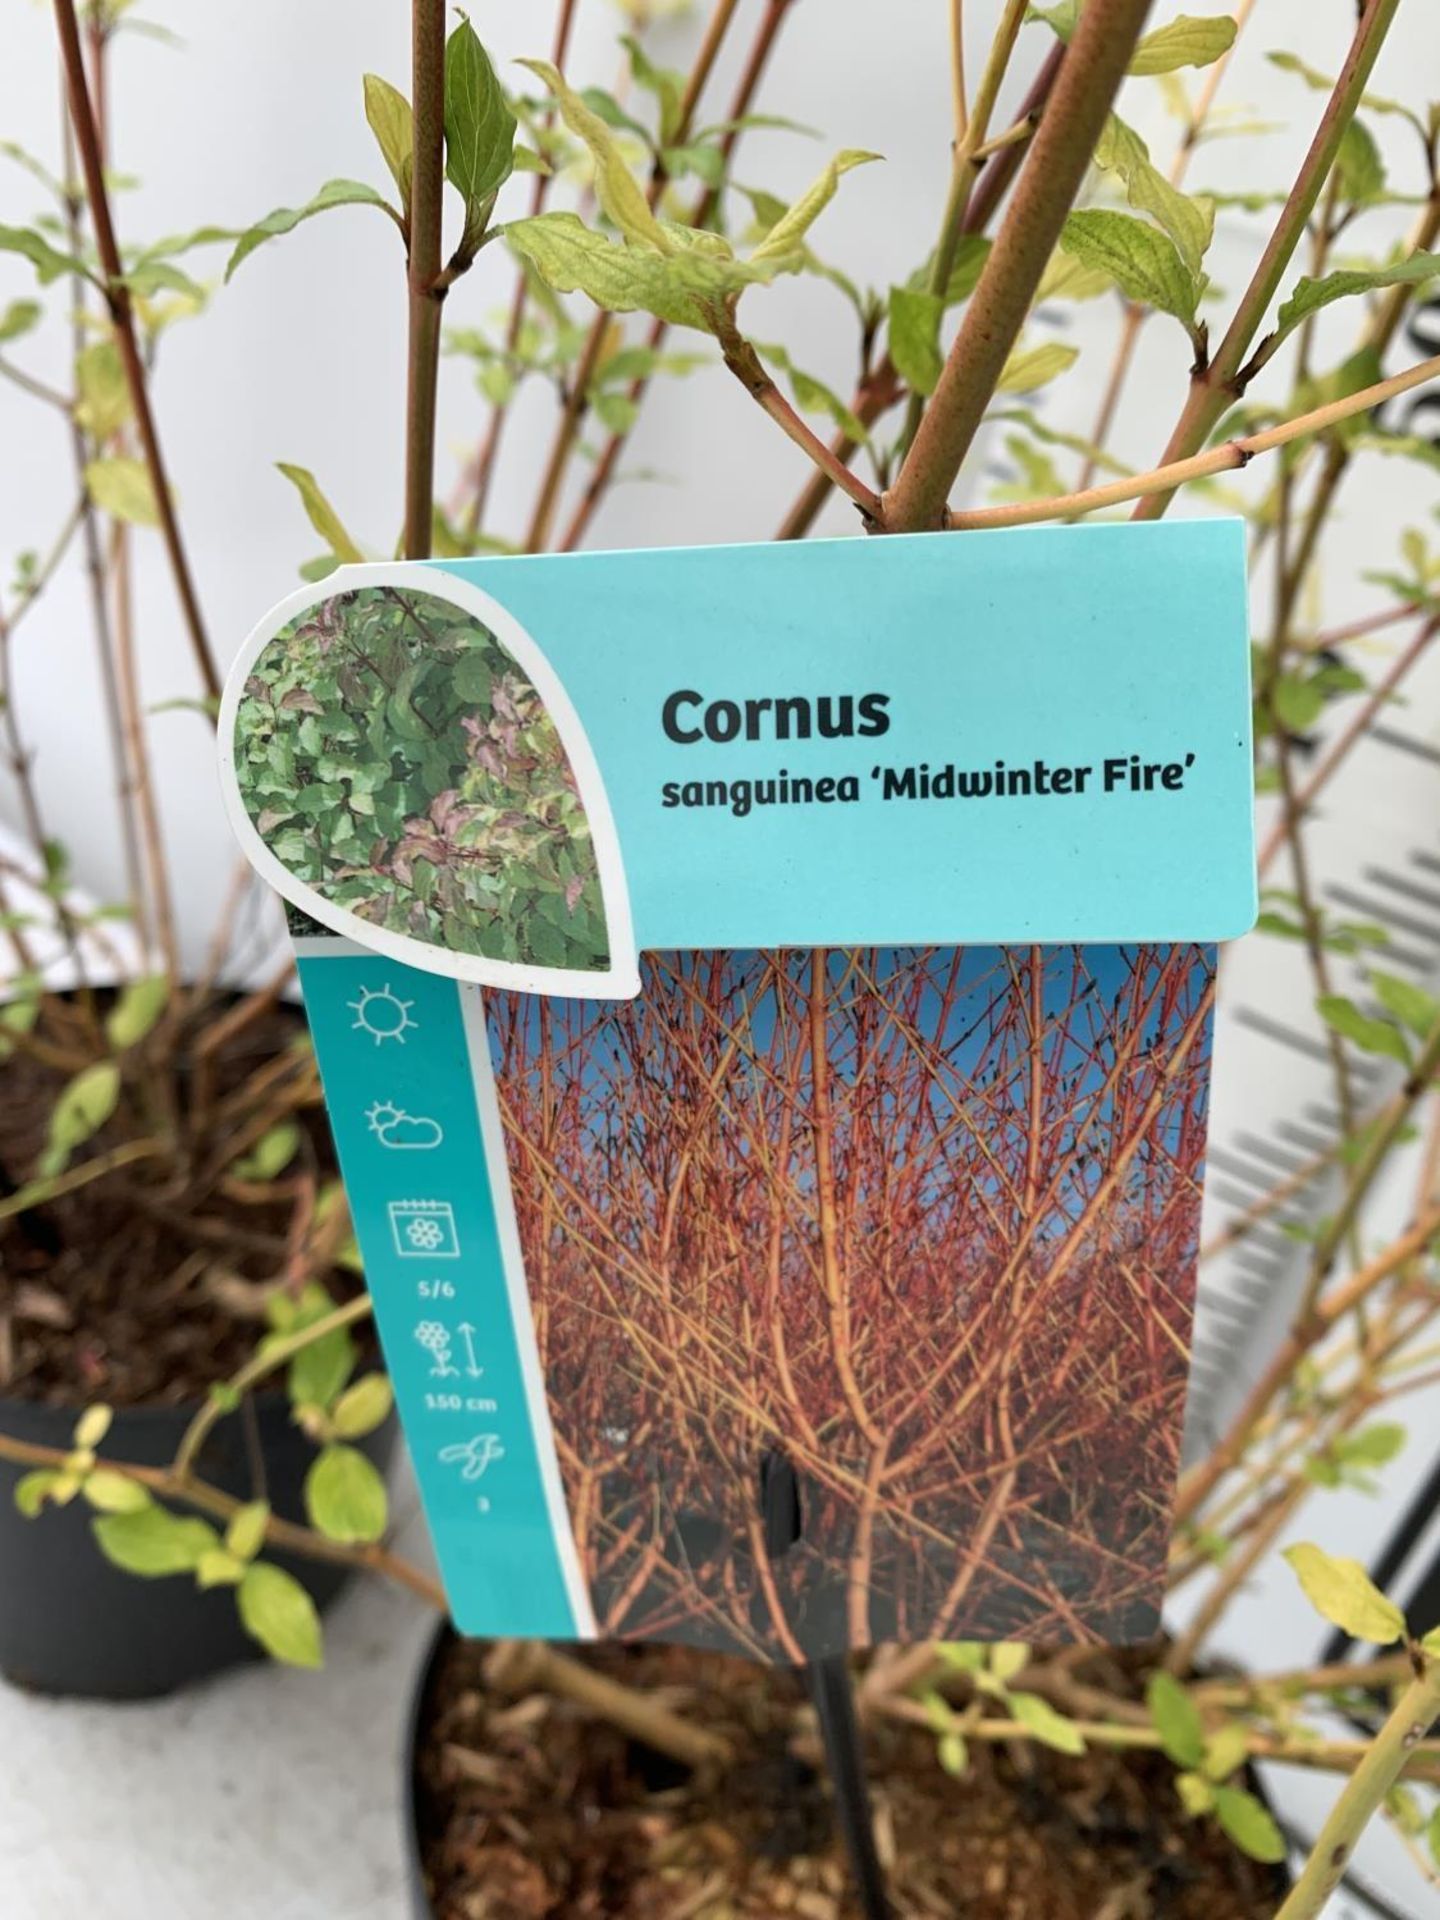 TWO CORNUS SANGUINEA 'MIDWINTER FIRE' IN 4 LTR POTS APPROX 90CM IN HEIGHT PLUS VAT TO BE SOLD FOR - Image 5 of 6